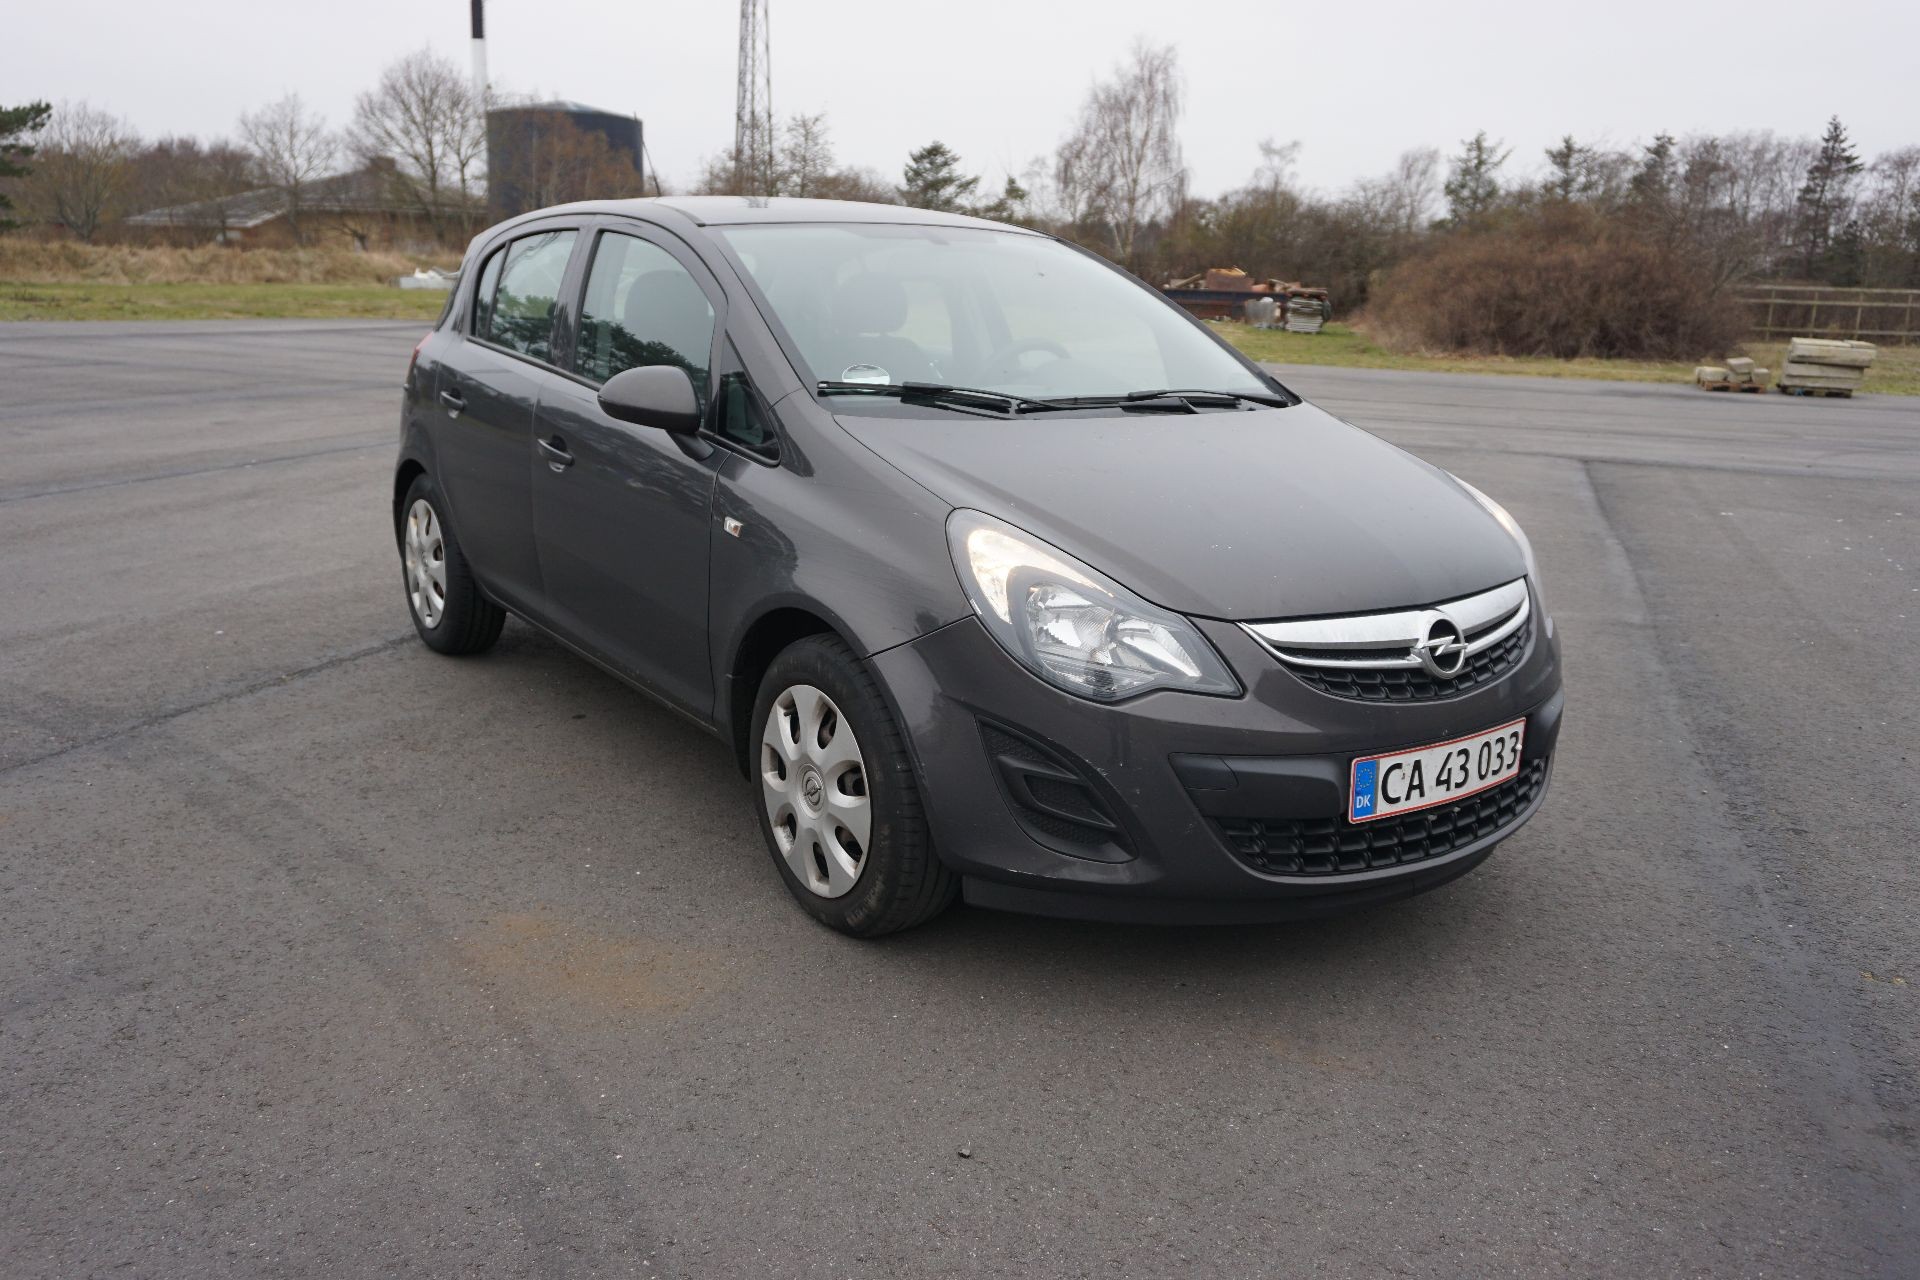 Opel Corsa Edition, Model Year 2006-, Silver, Driving,, 41% OFF